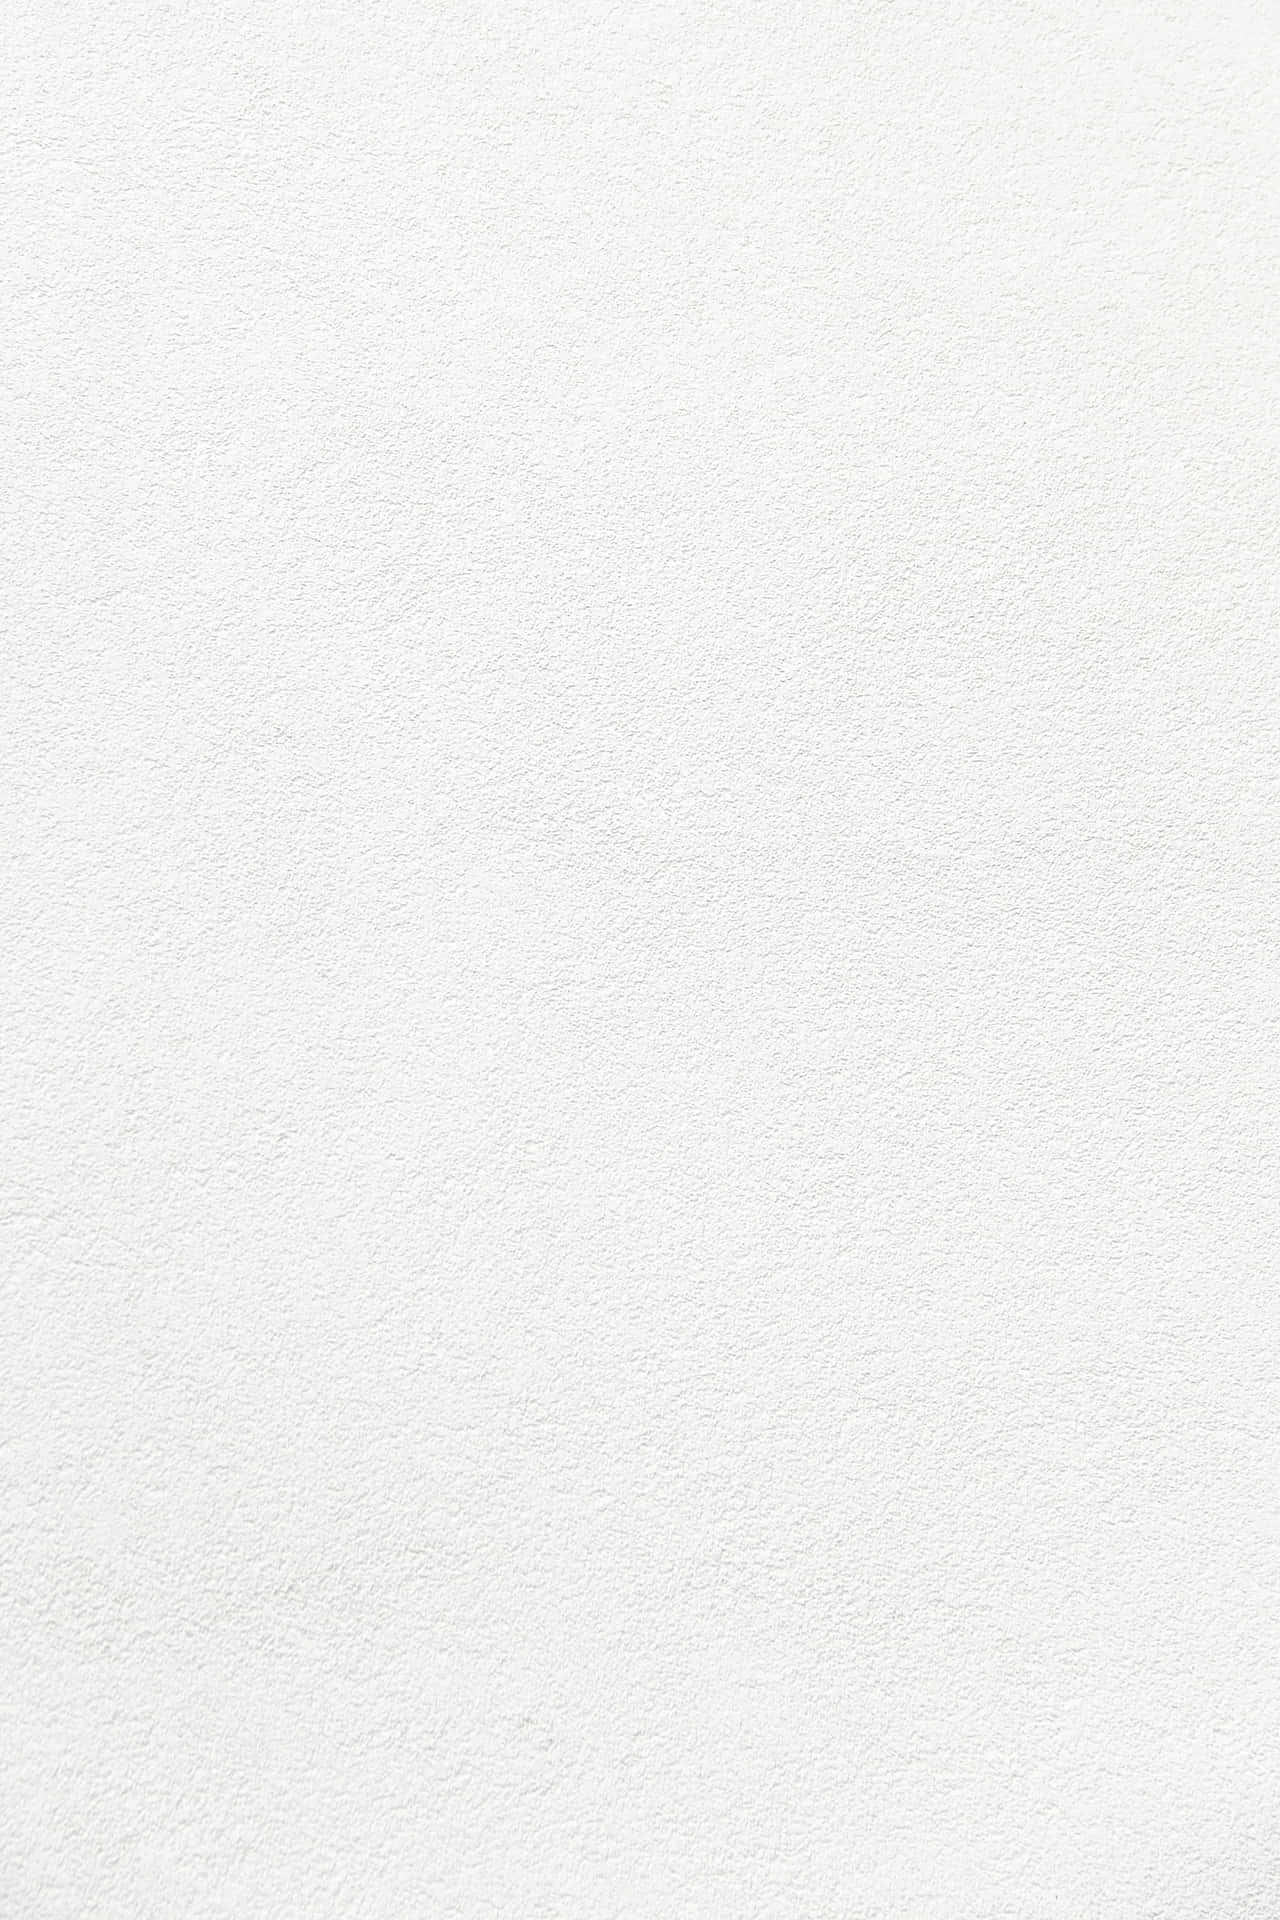 White Fabric Texture With Bright Light Wallpaper